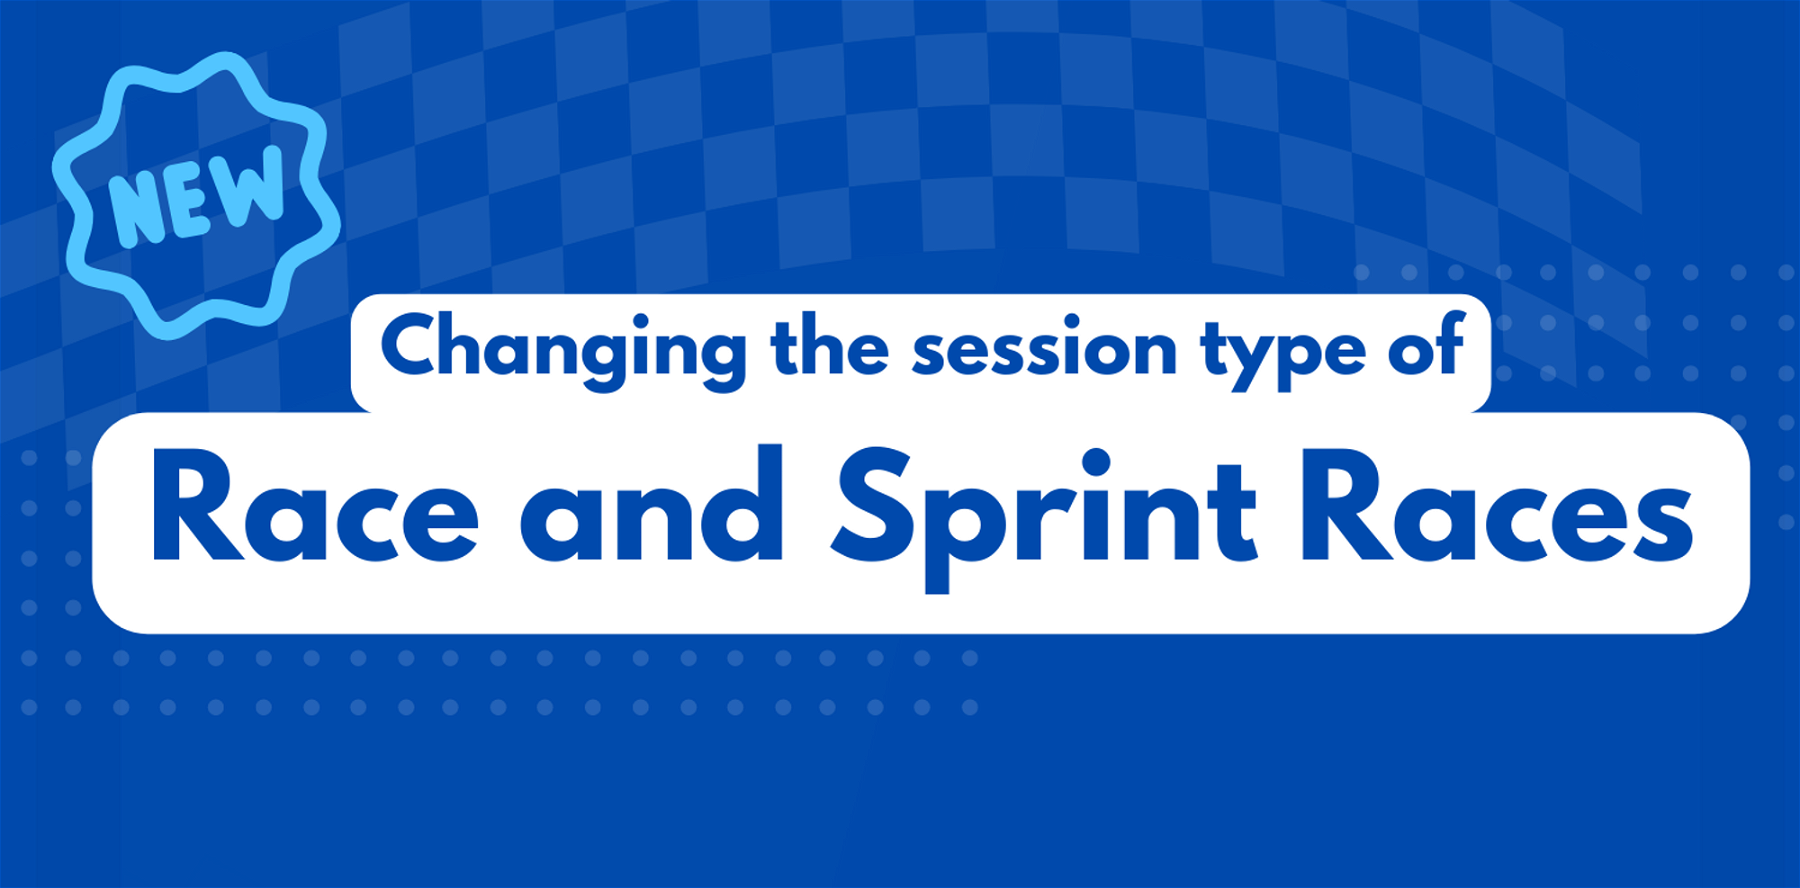 Change Race and Sprint Race session types